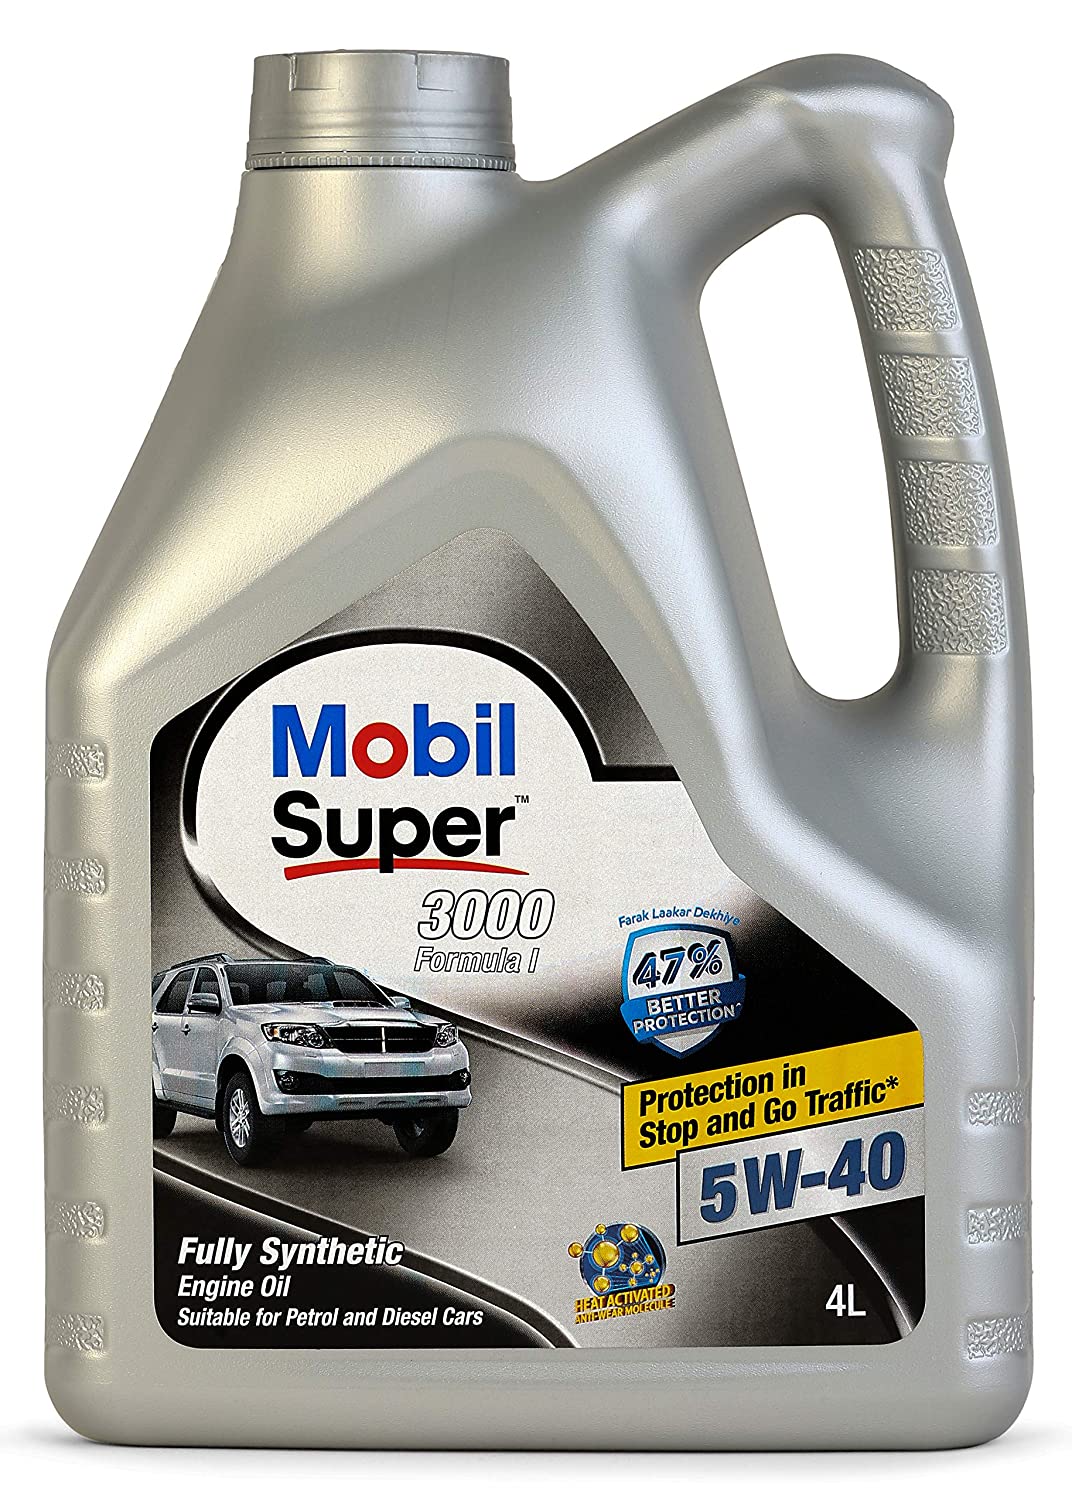 Mobil Super 3000 Formula I 5W-40 Fully Synthetic Engine Oil (4L)